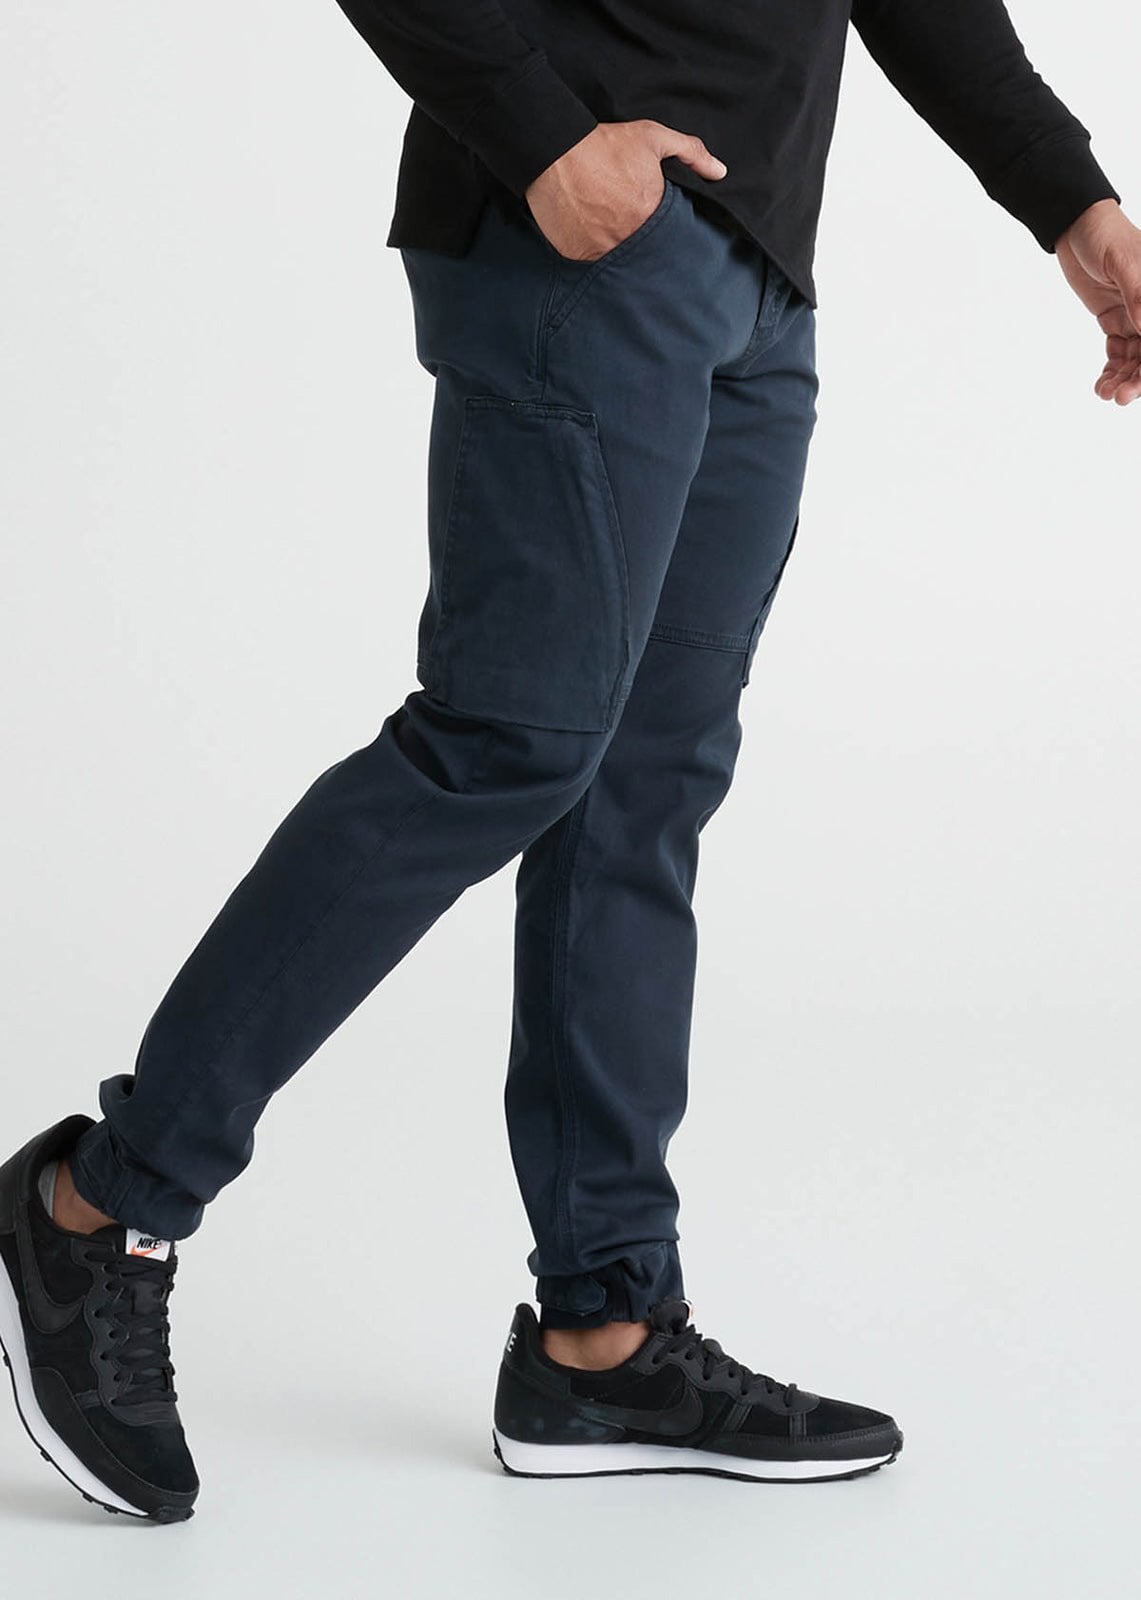 Men's Curling pants in navy winter cotton drill made in France